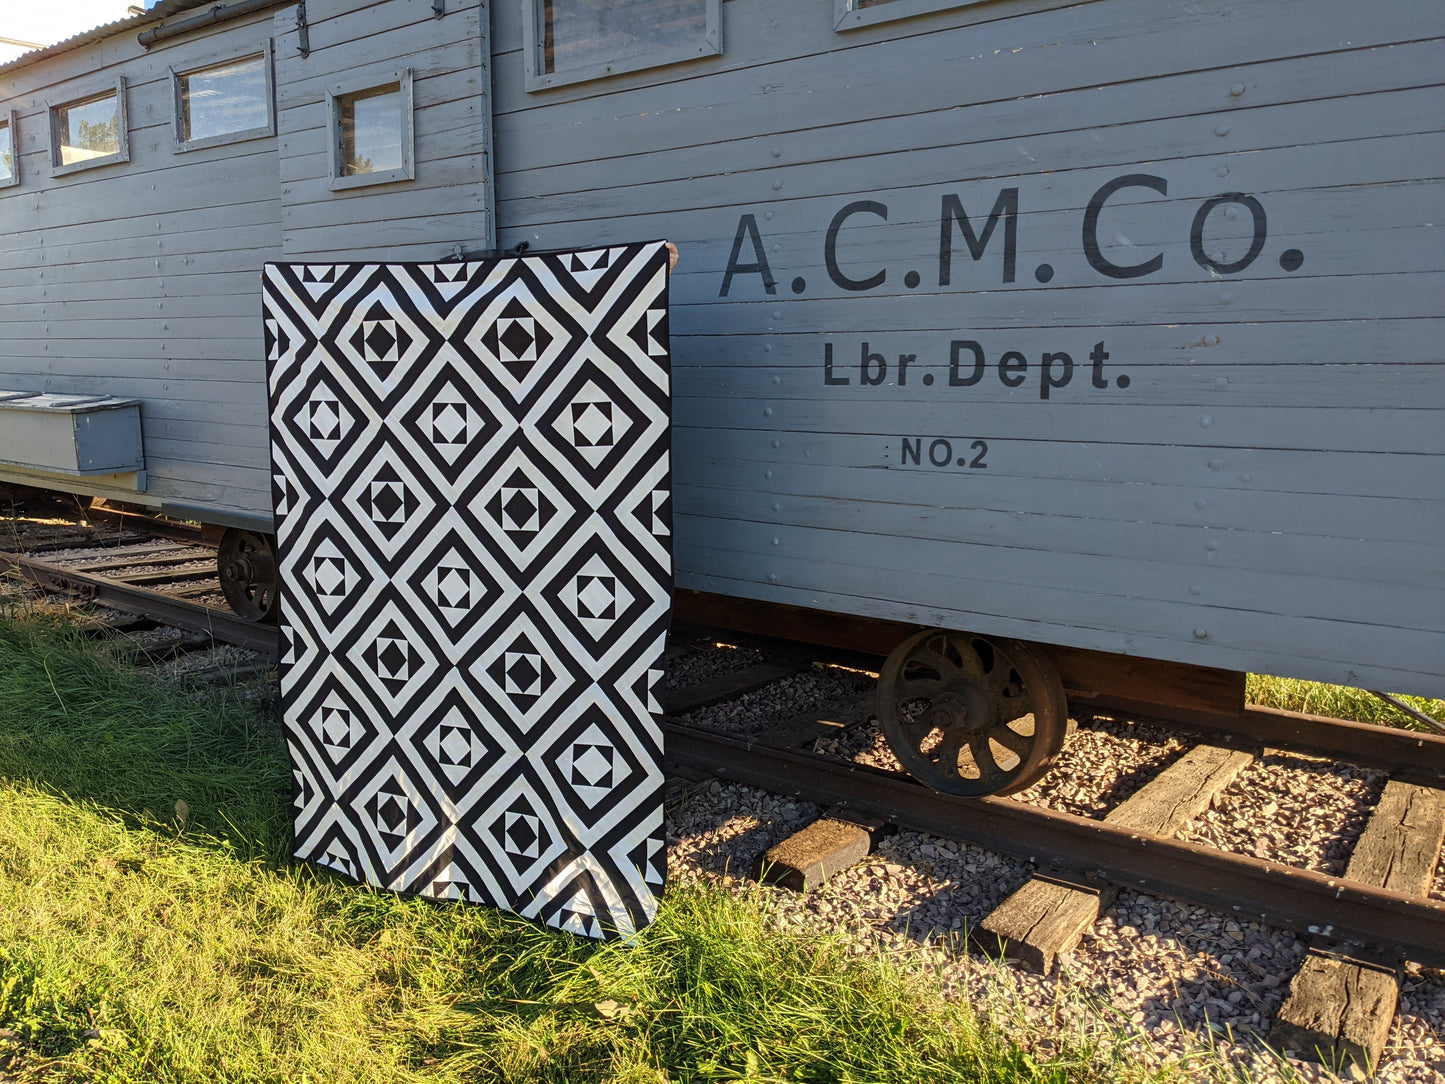 Black and white modern quilt in front of train car.